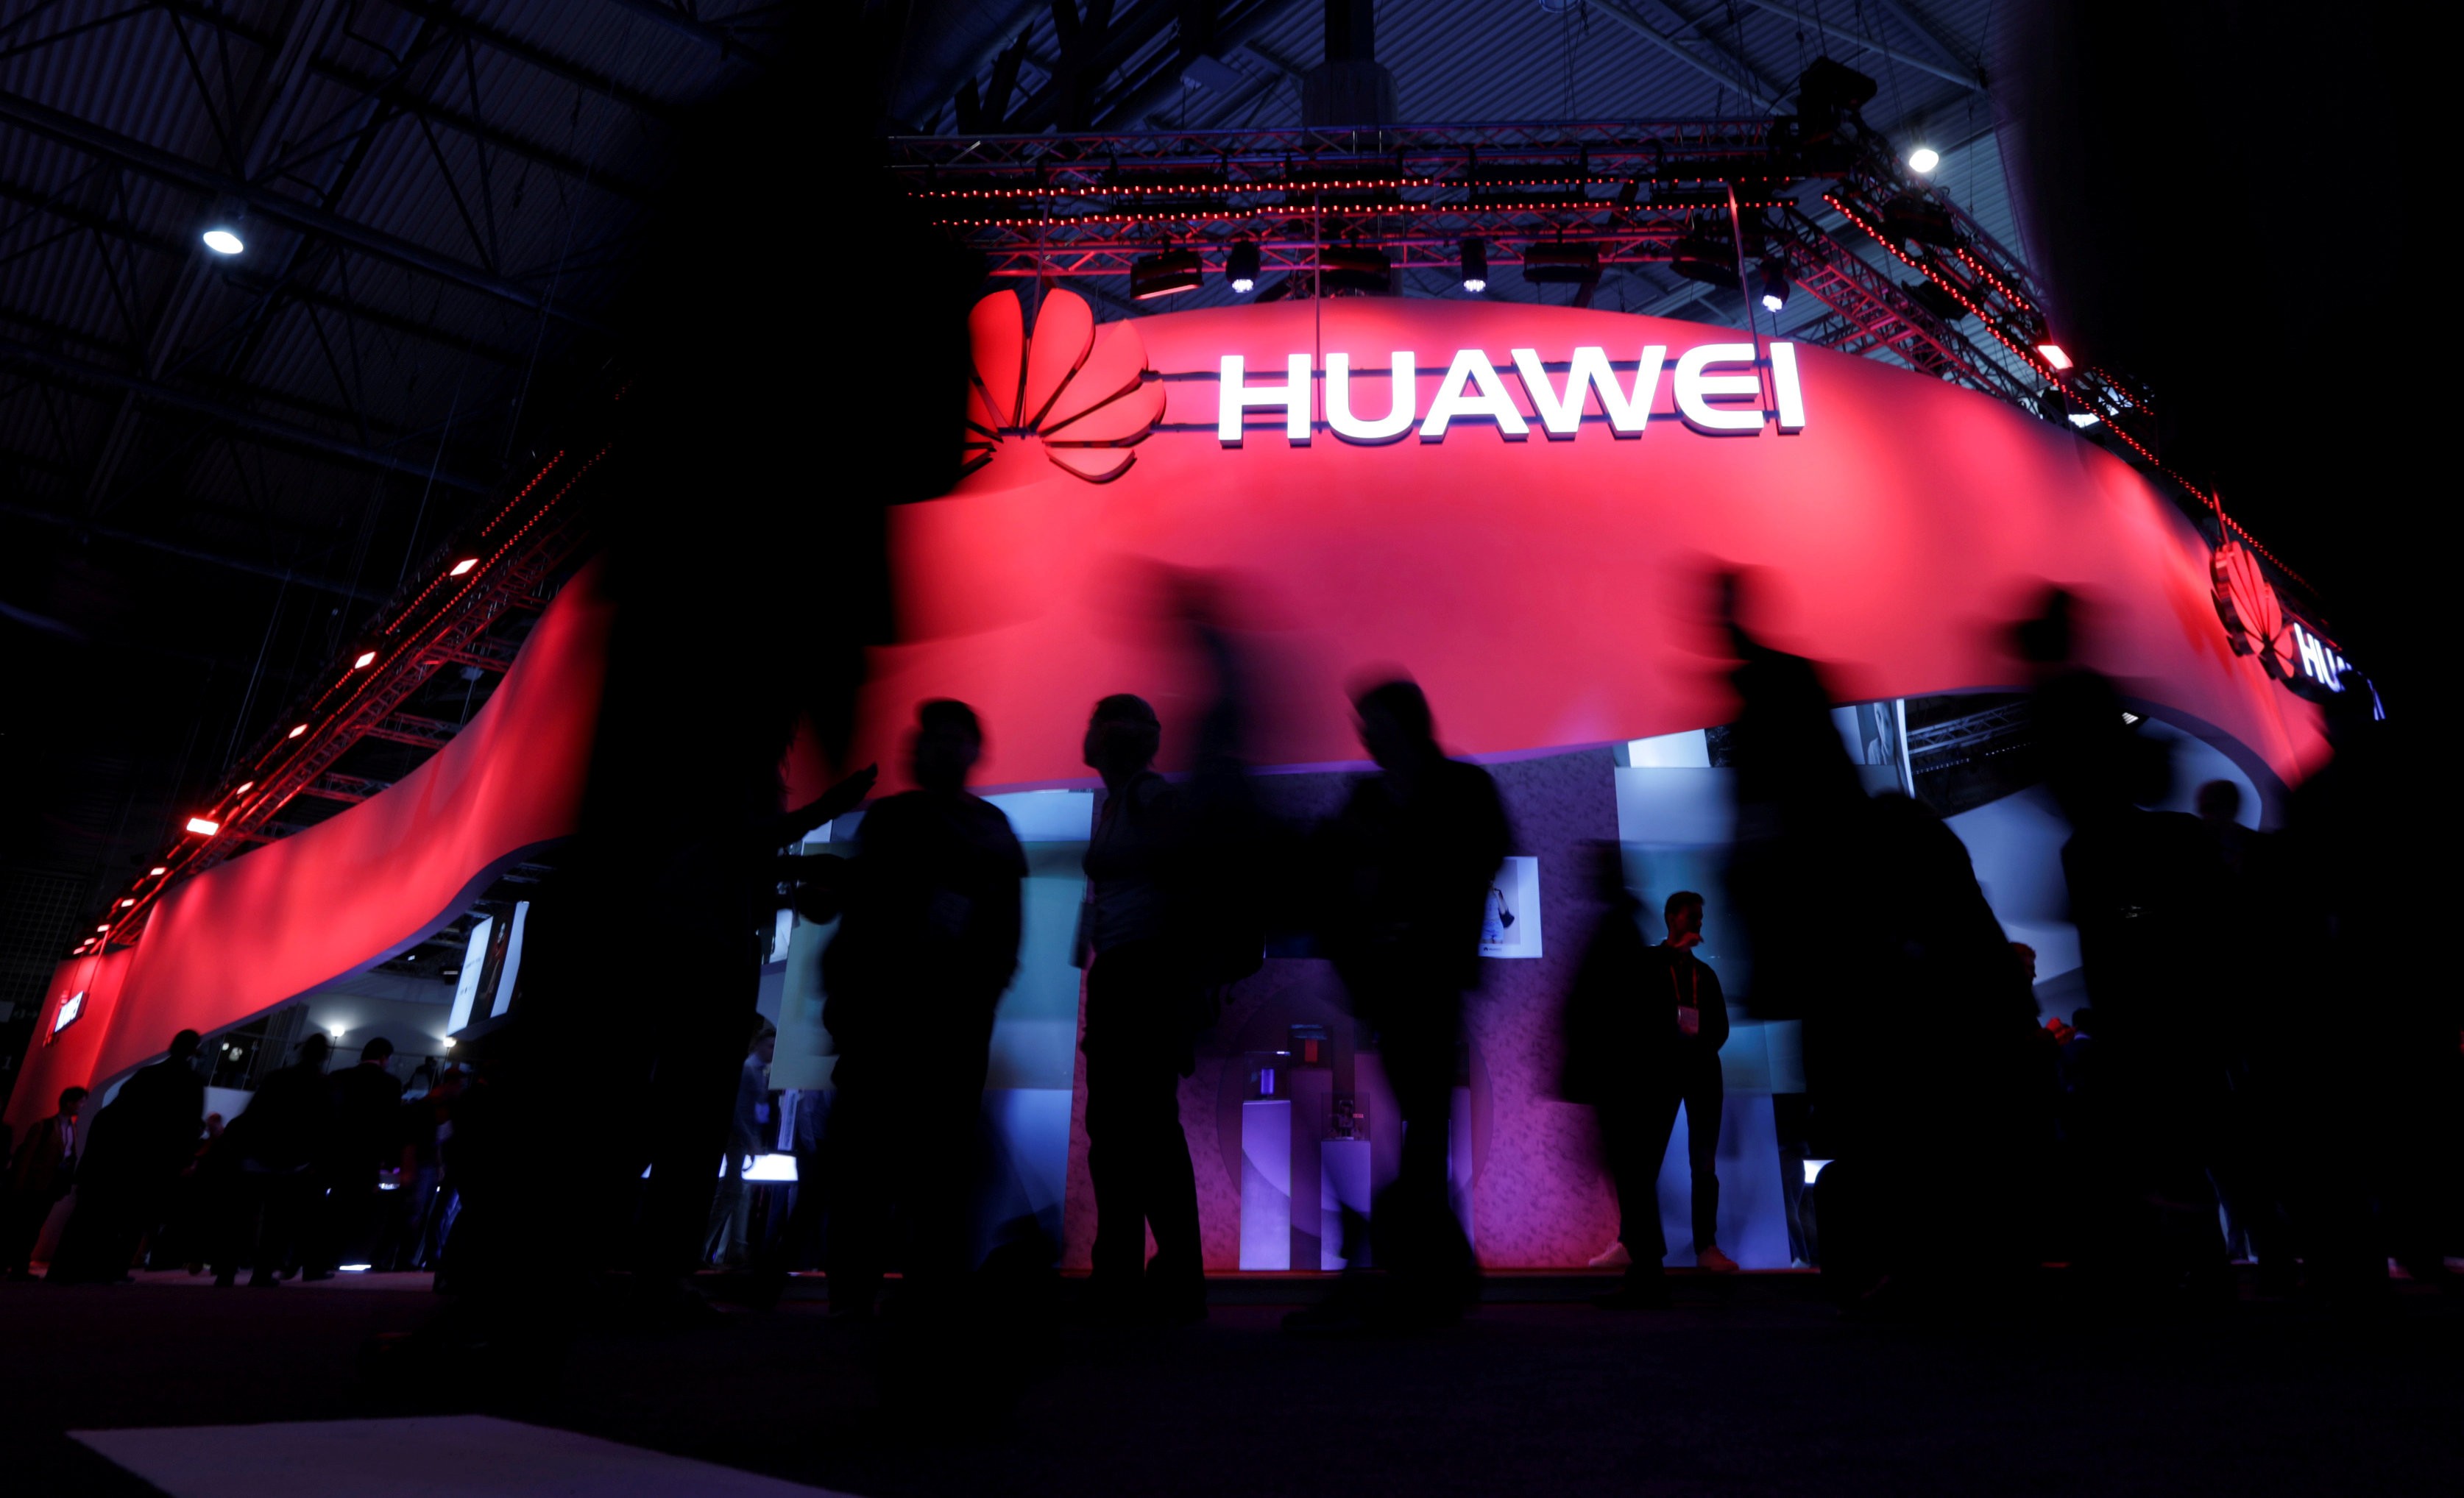 Huawei Technologies, the world’s largest telecommunications equipment supplier, plans to introduce its first 5G smartphone later this year.